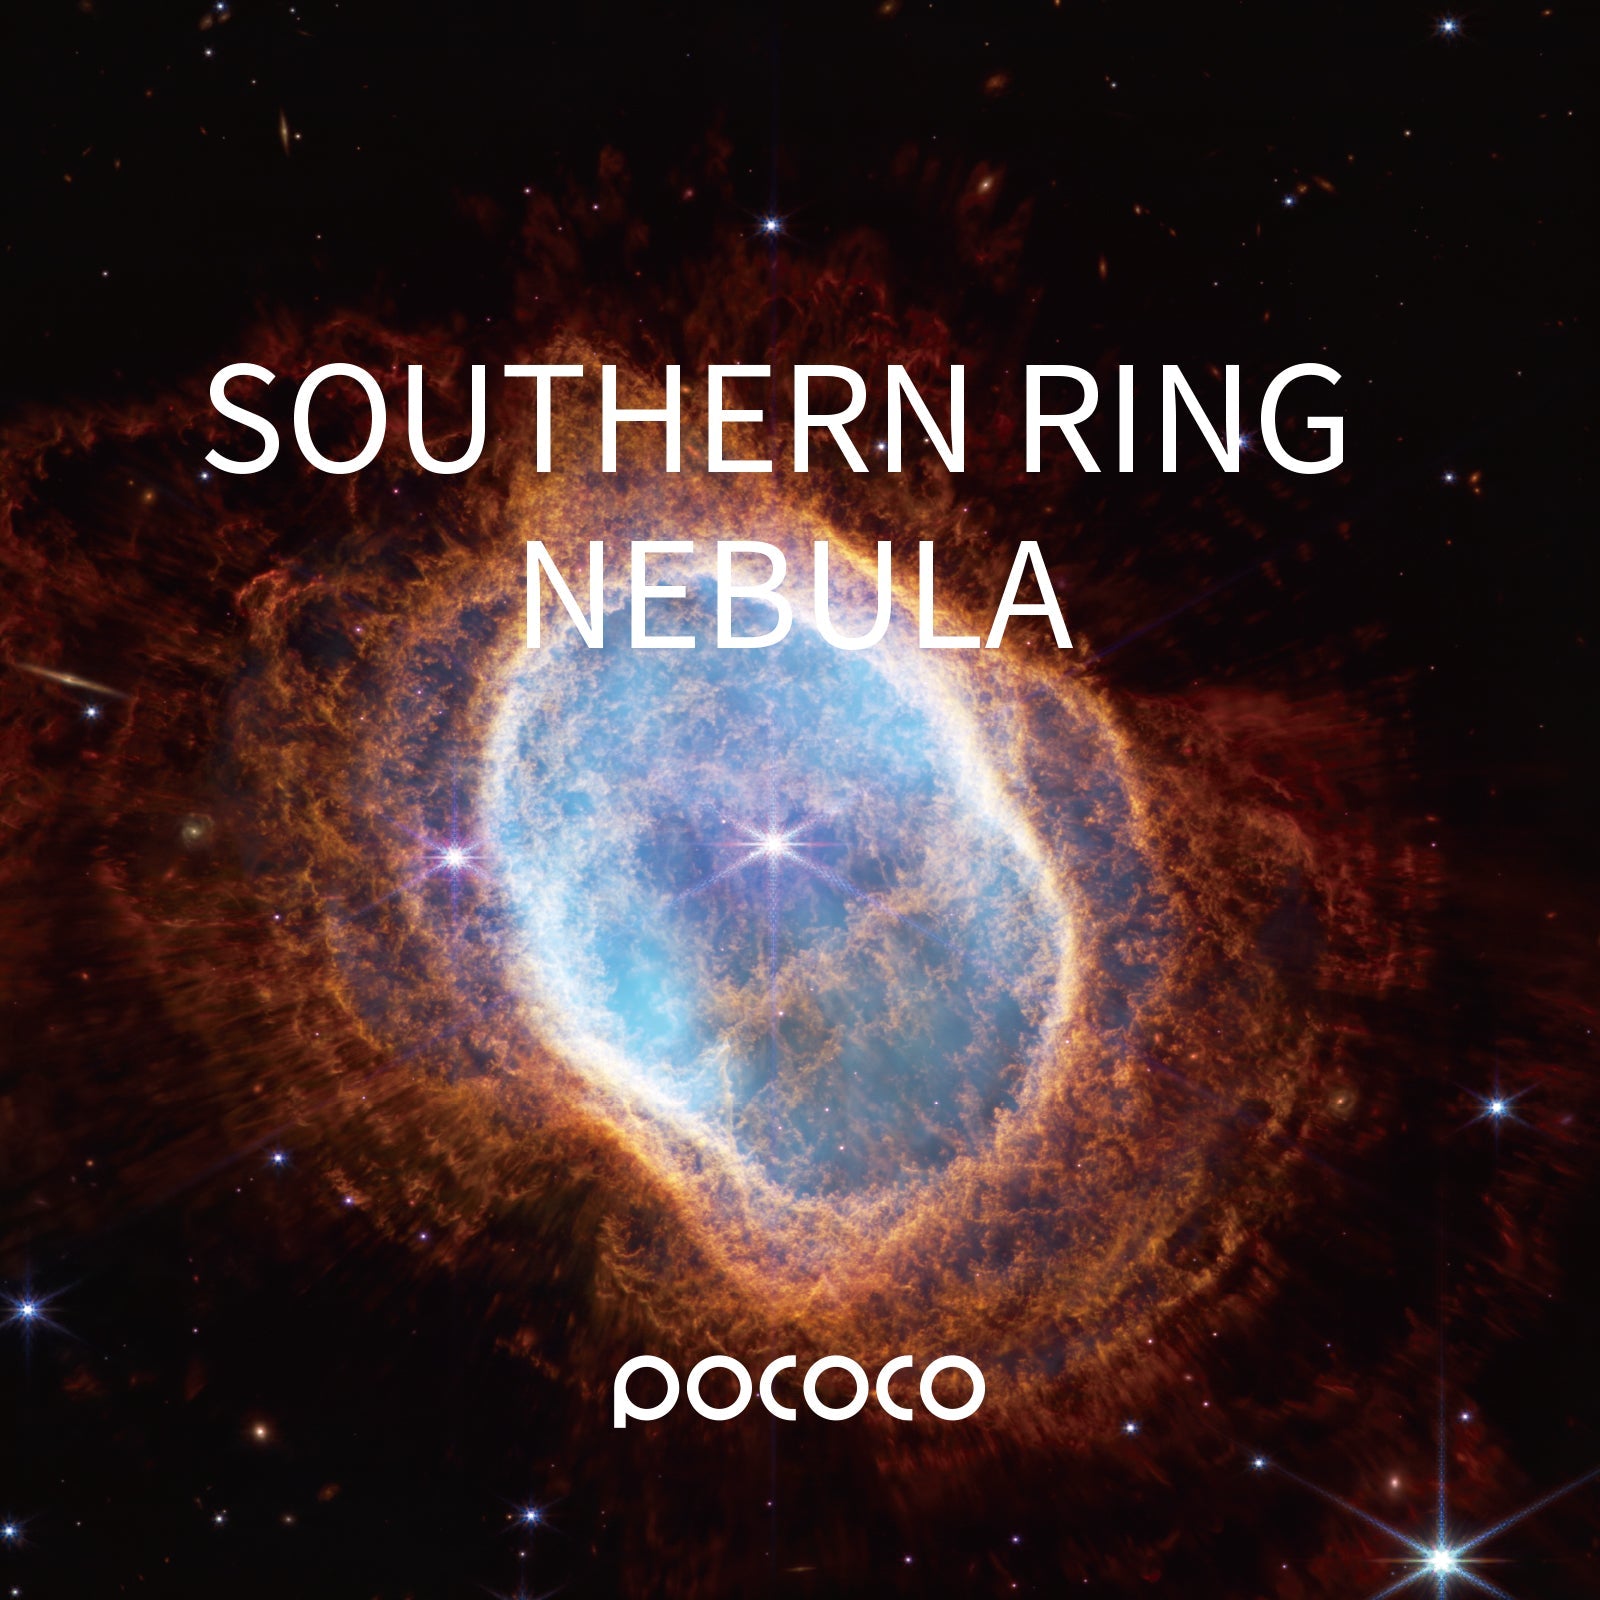 POCOCO Galaxy Projector Disc - Southern Ring